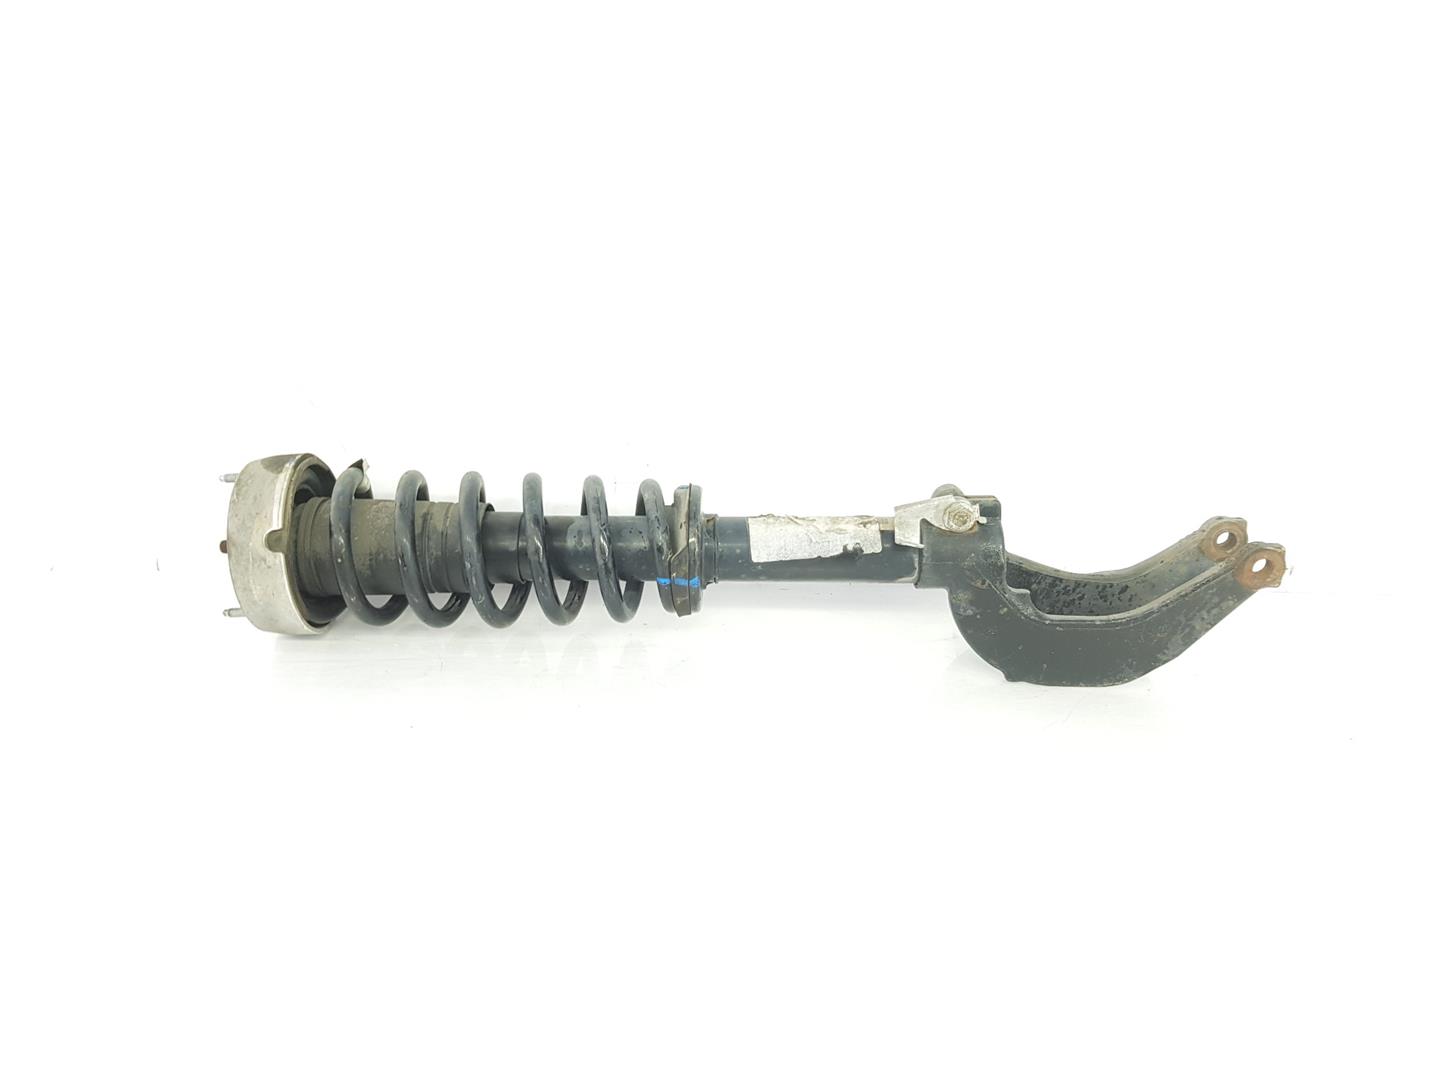 BMW X6 E71/E72 (2008-2012) Front Right Shock Absorber 31326781918, 31126775086 19802140